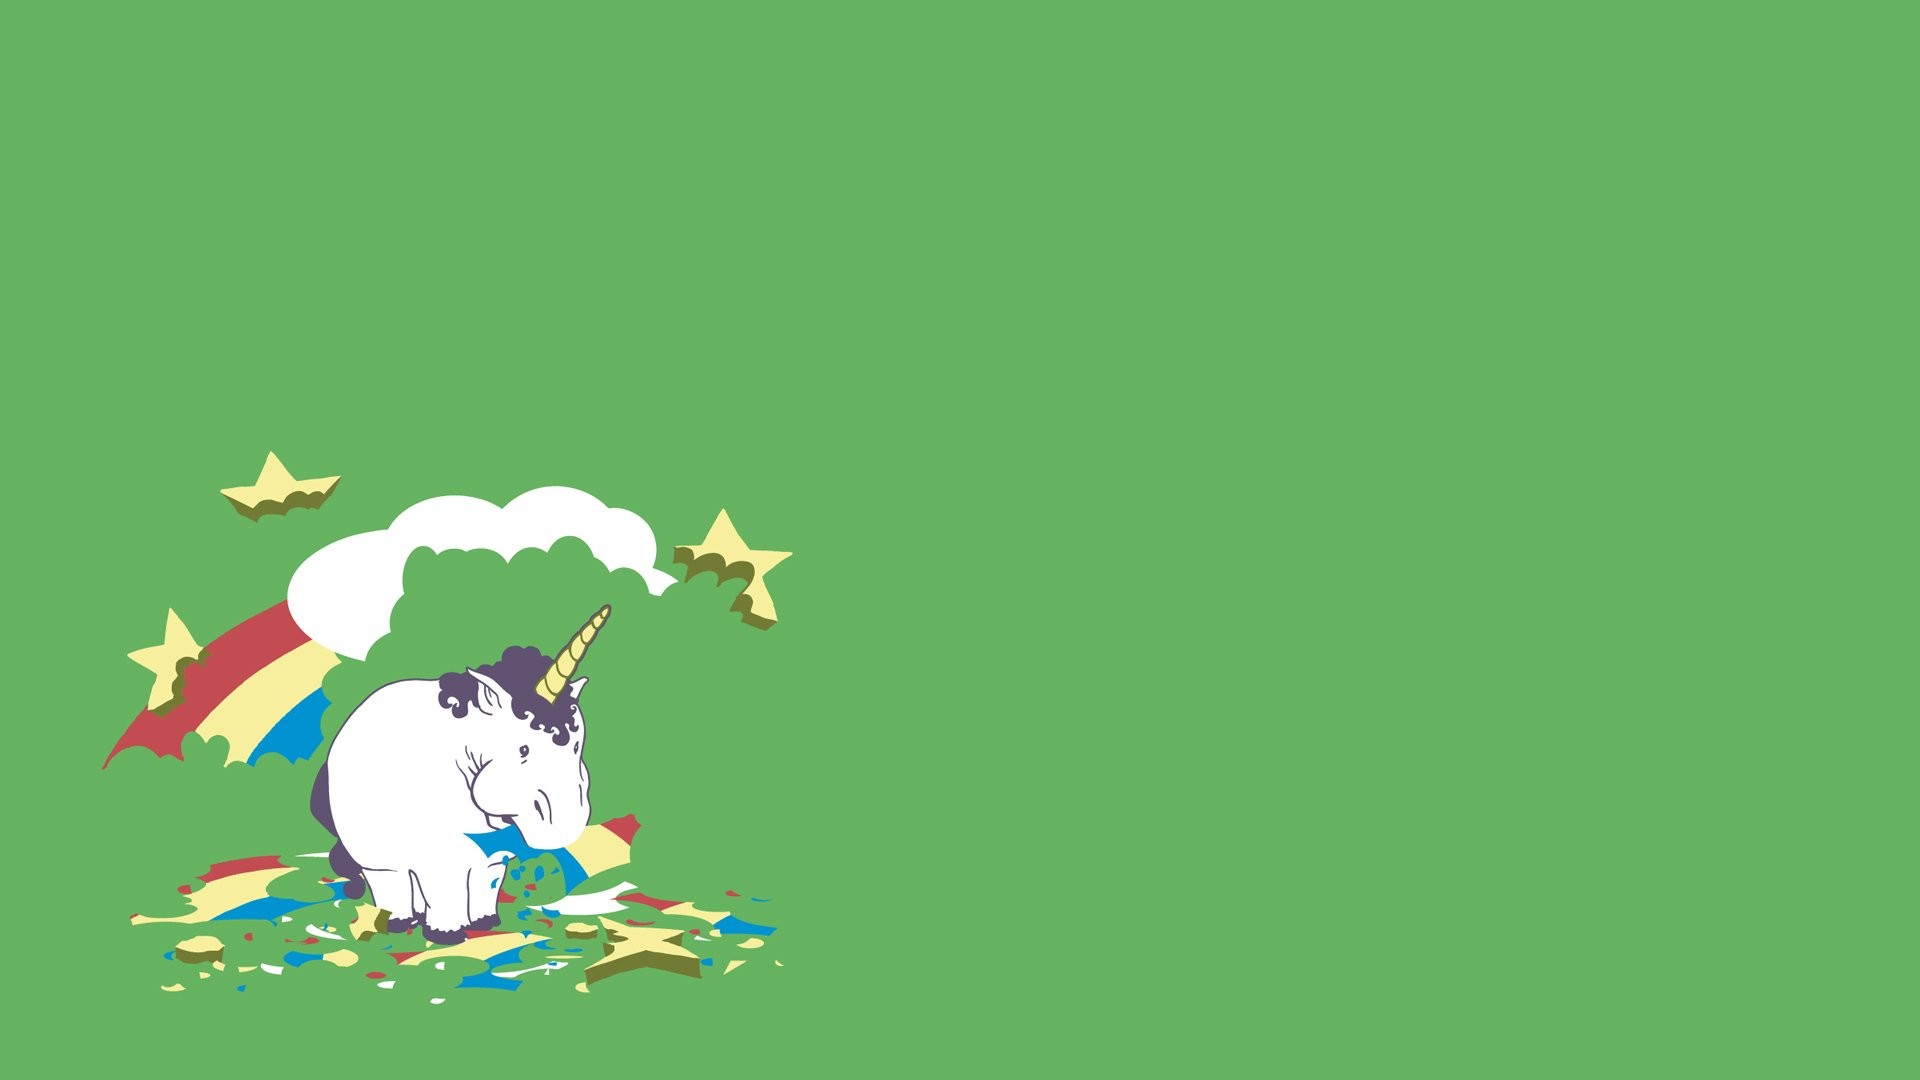 Wallpaper Cute Unicorn Desktop with high-resolution 1920x1080 pixel. You can use this wallpaper for your Windows and Mac OS computers as well as your Android and iPhone smartphones